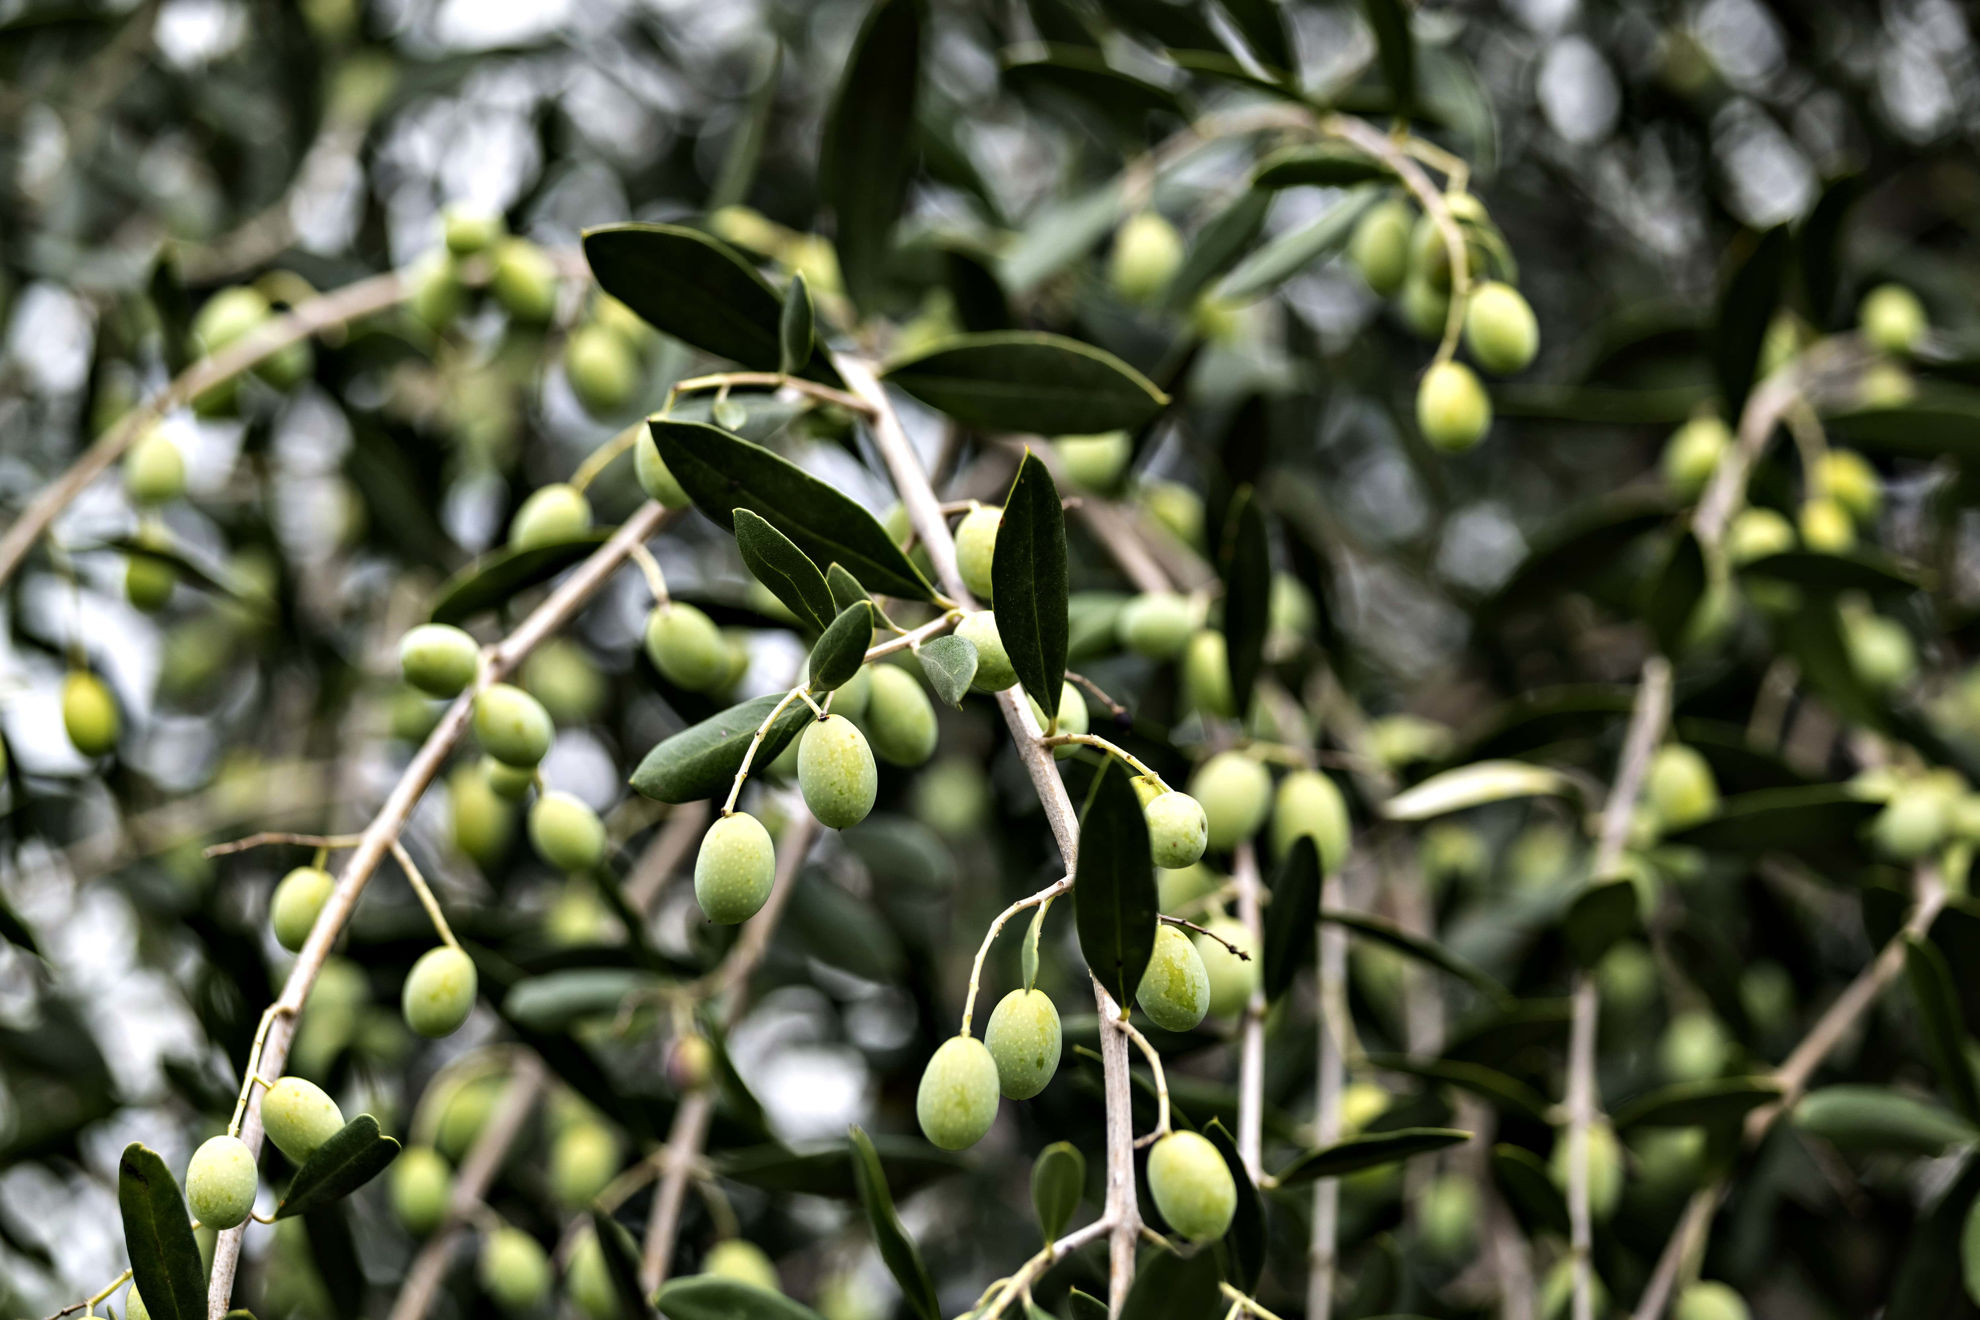 Types of olive oil: which are they?